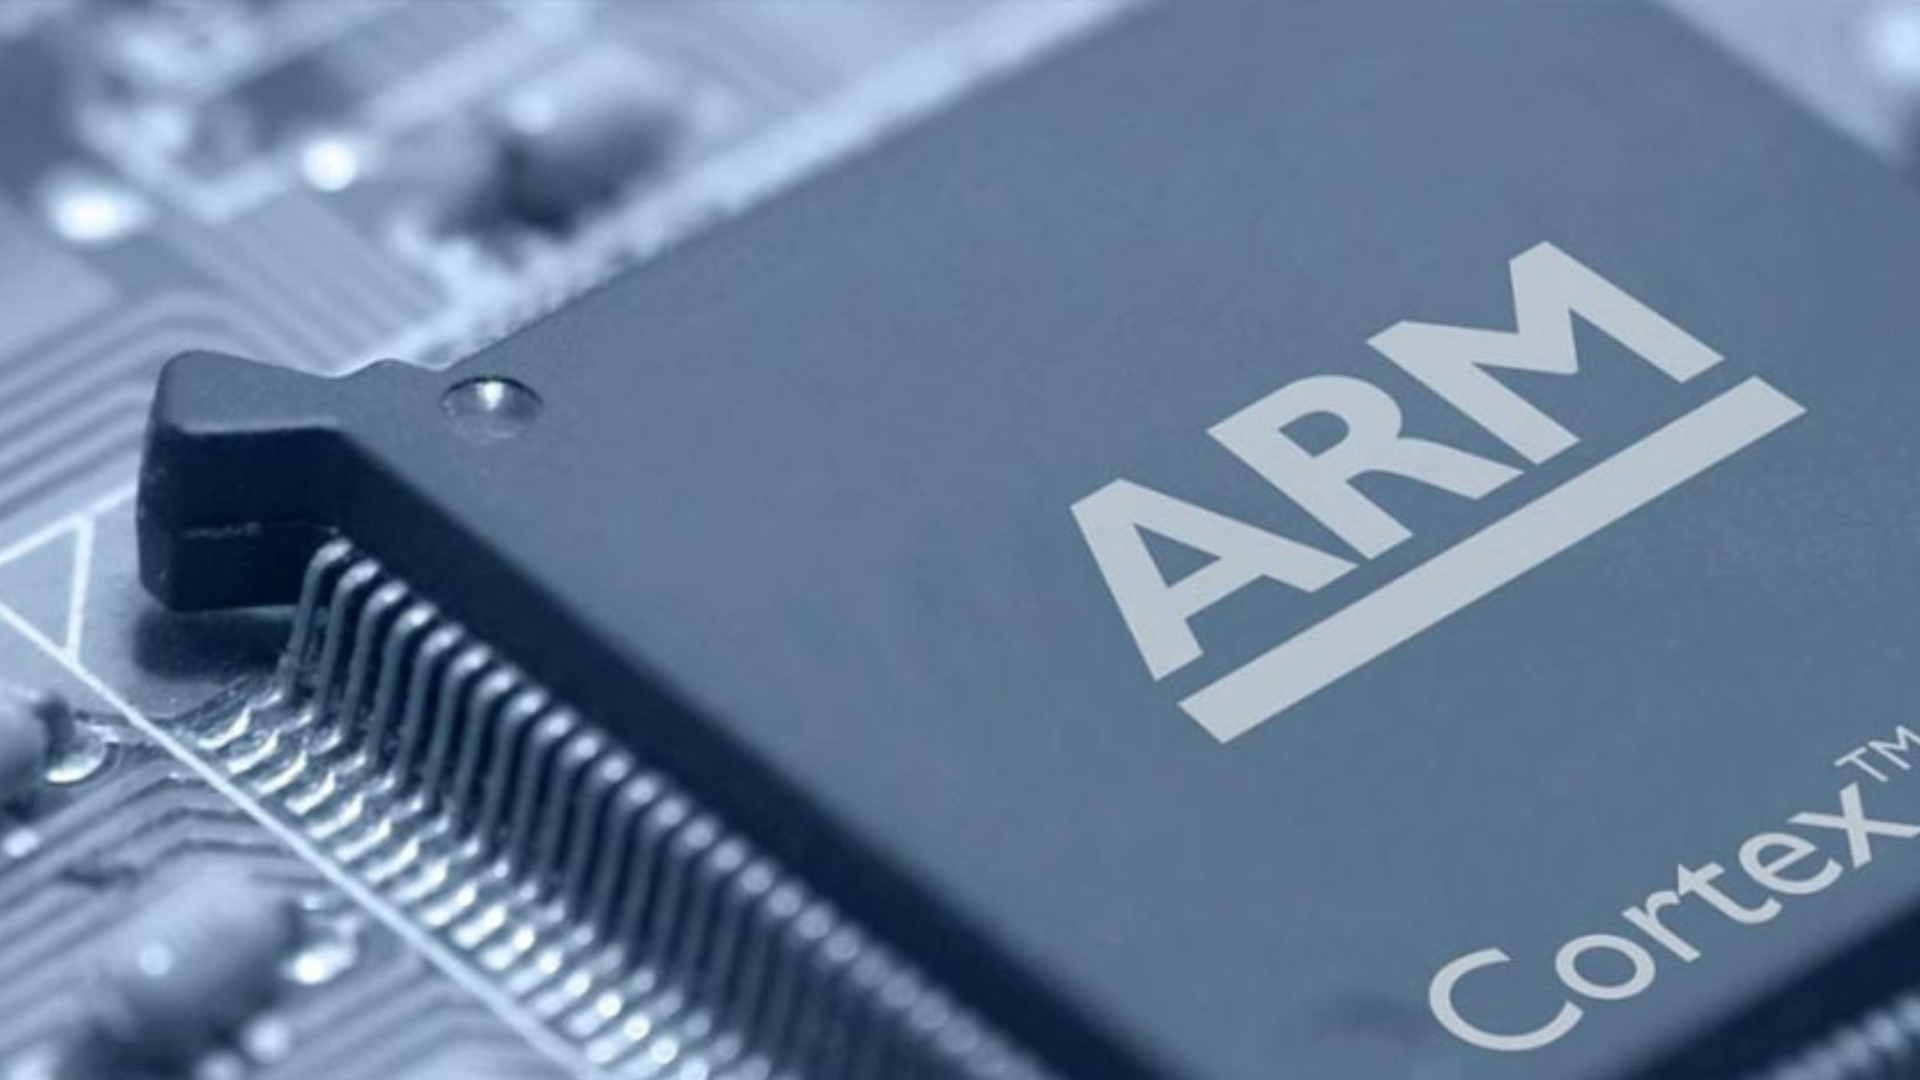 Arm decided for sole US listing in 2023 , will consider UK listing in "due course"